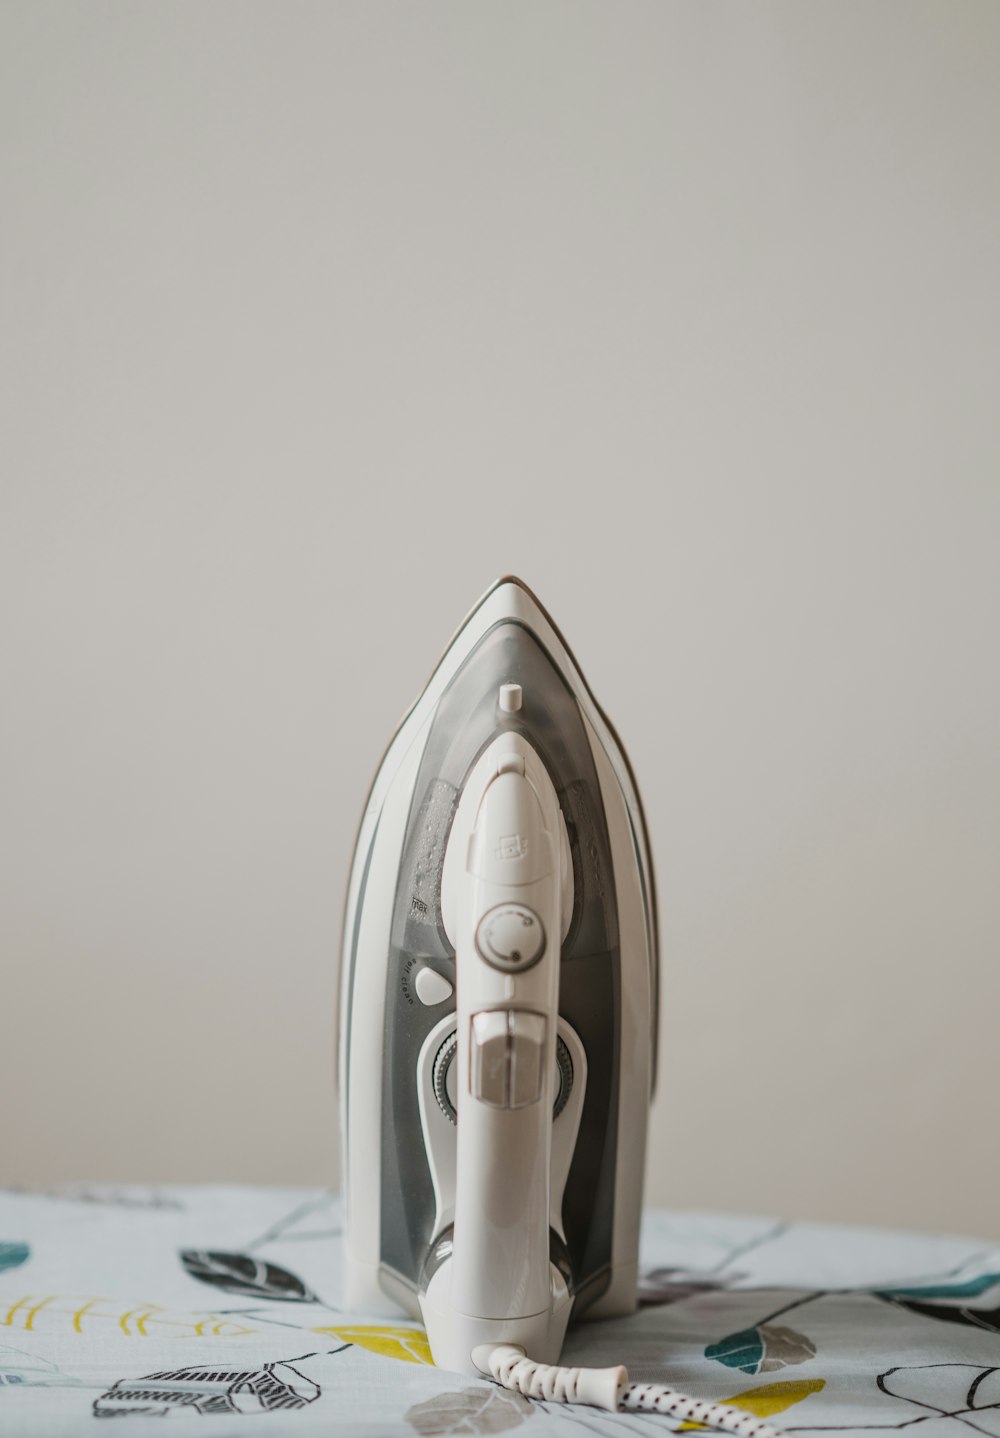 Clothes Iron Pictures  Download Free Images on Unsplash